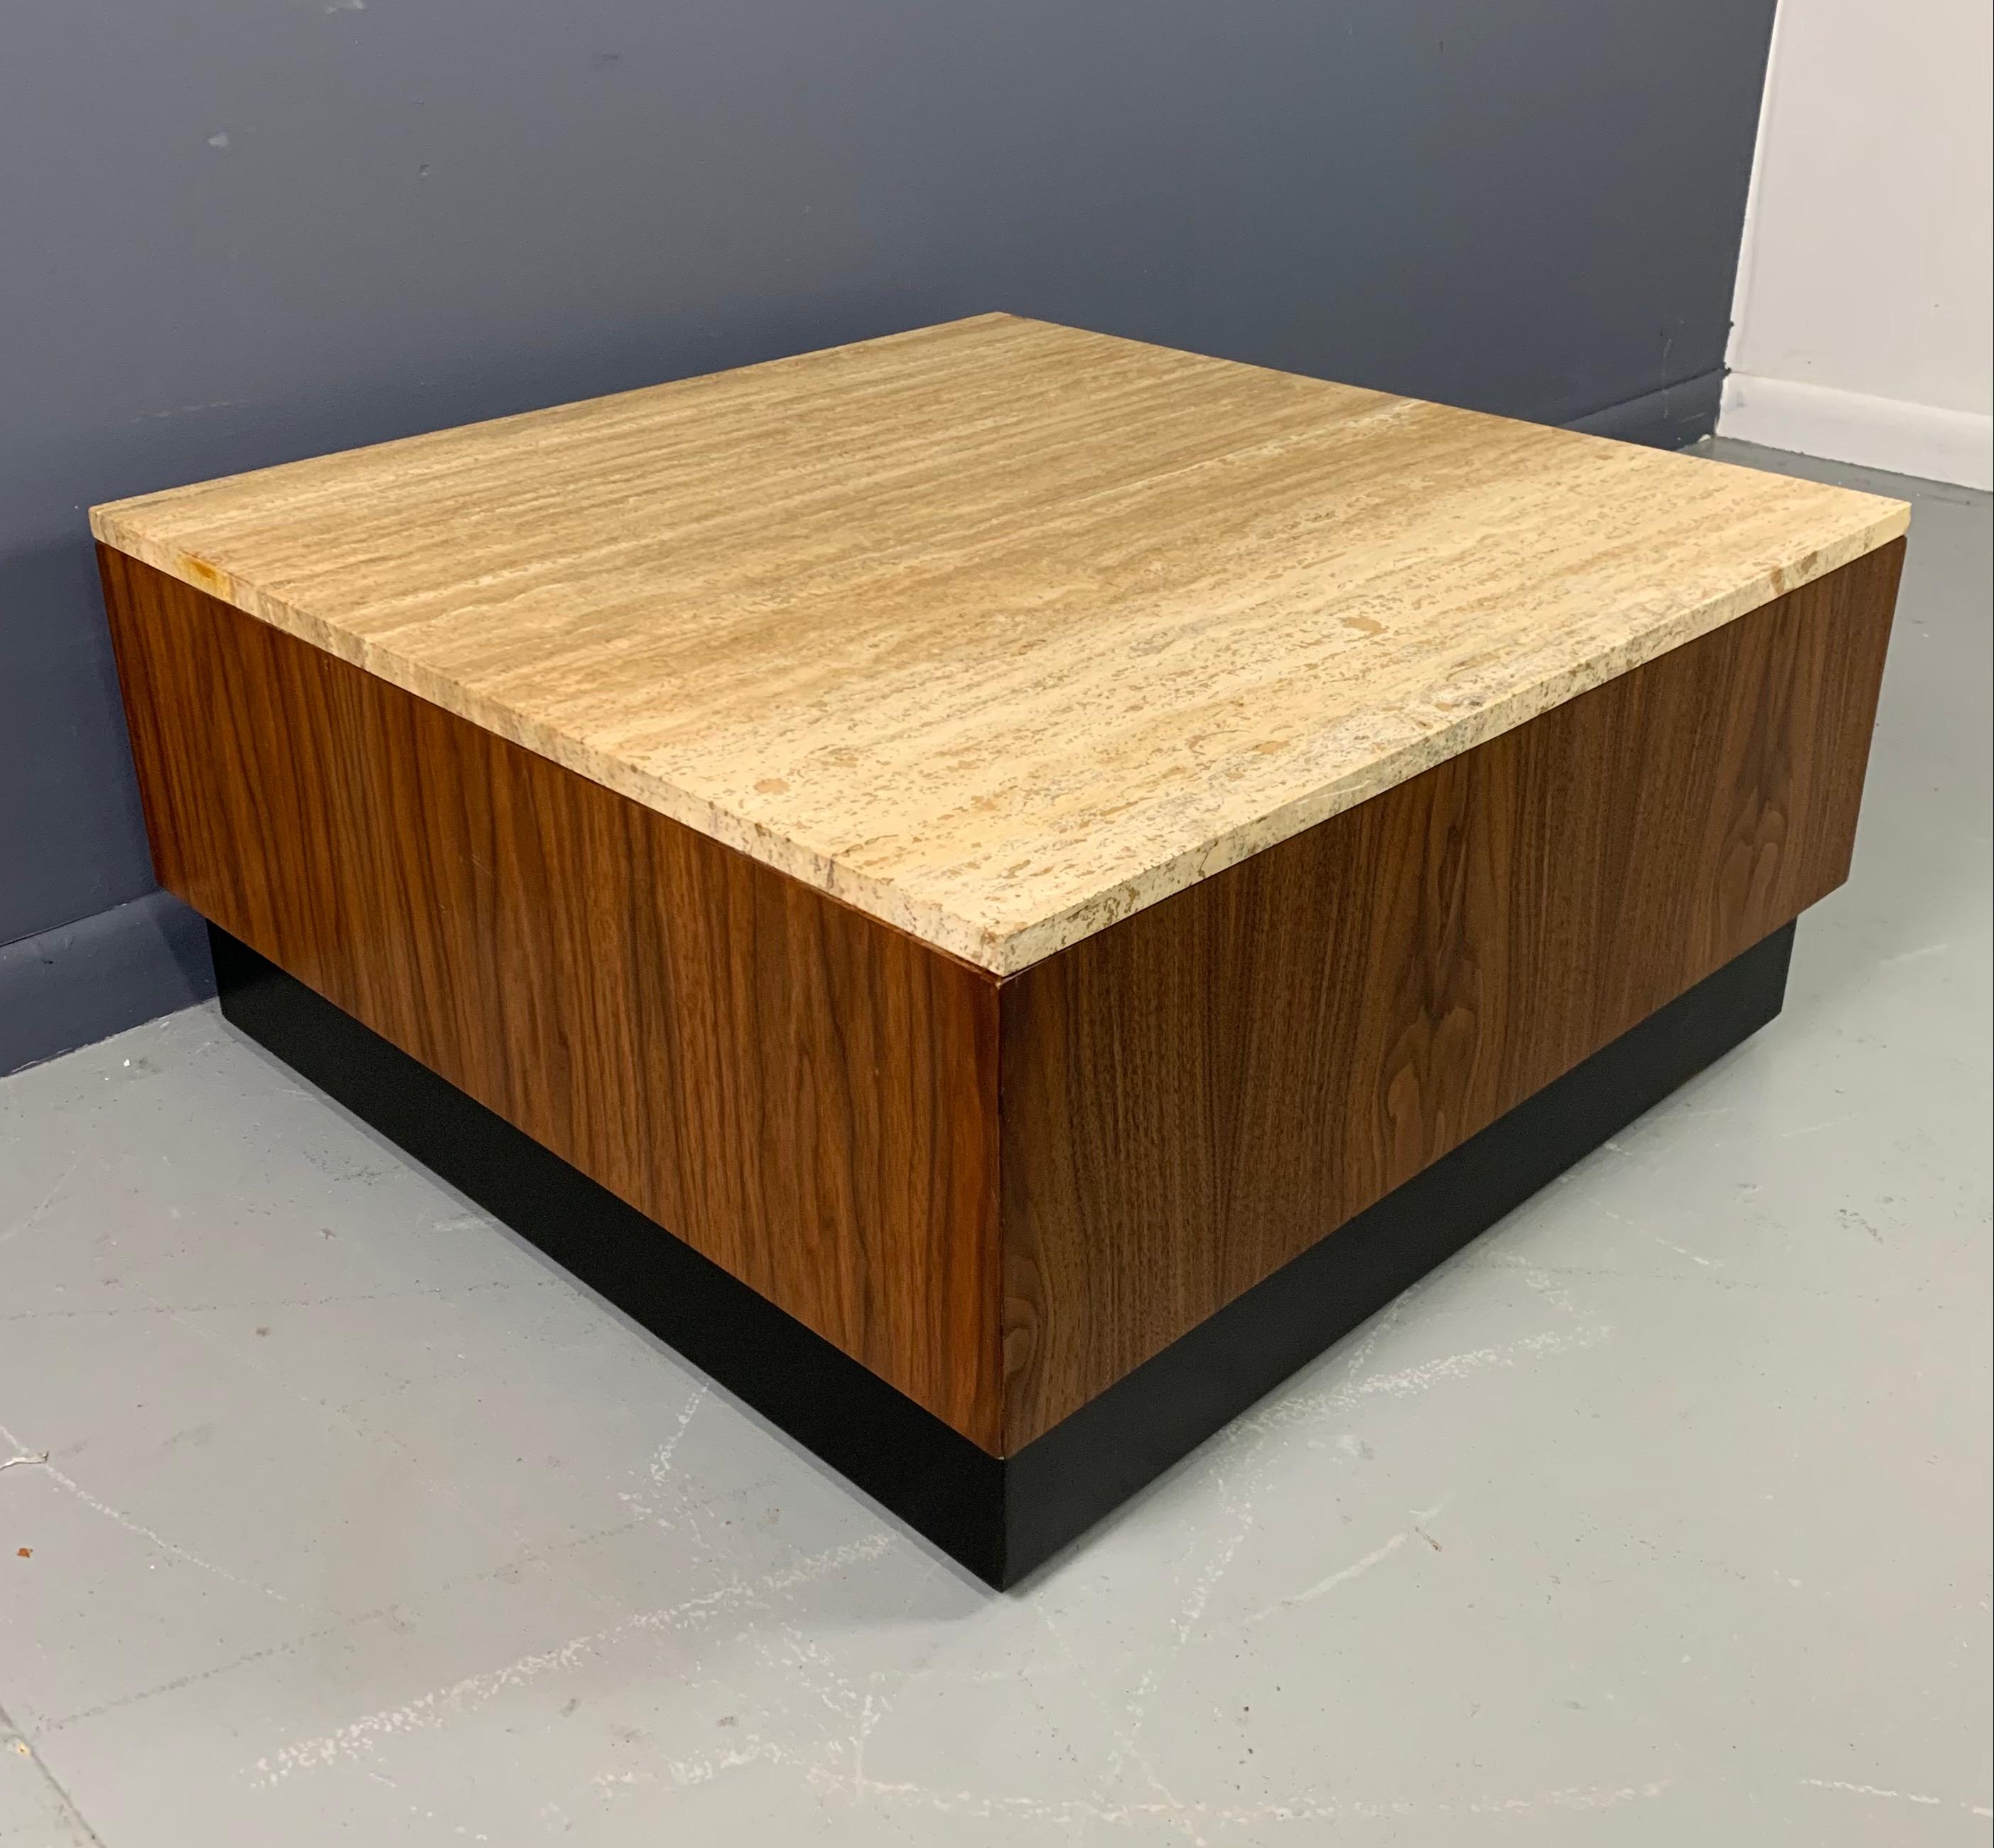 Classic midcentury coffee table with a twist, the travertine and walnut is a wonderful combination.